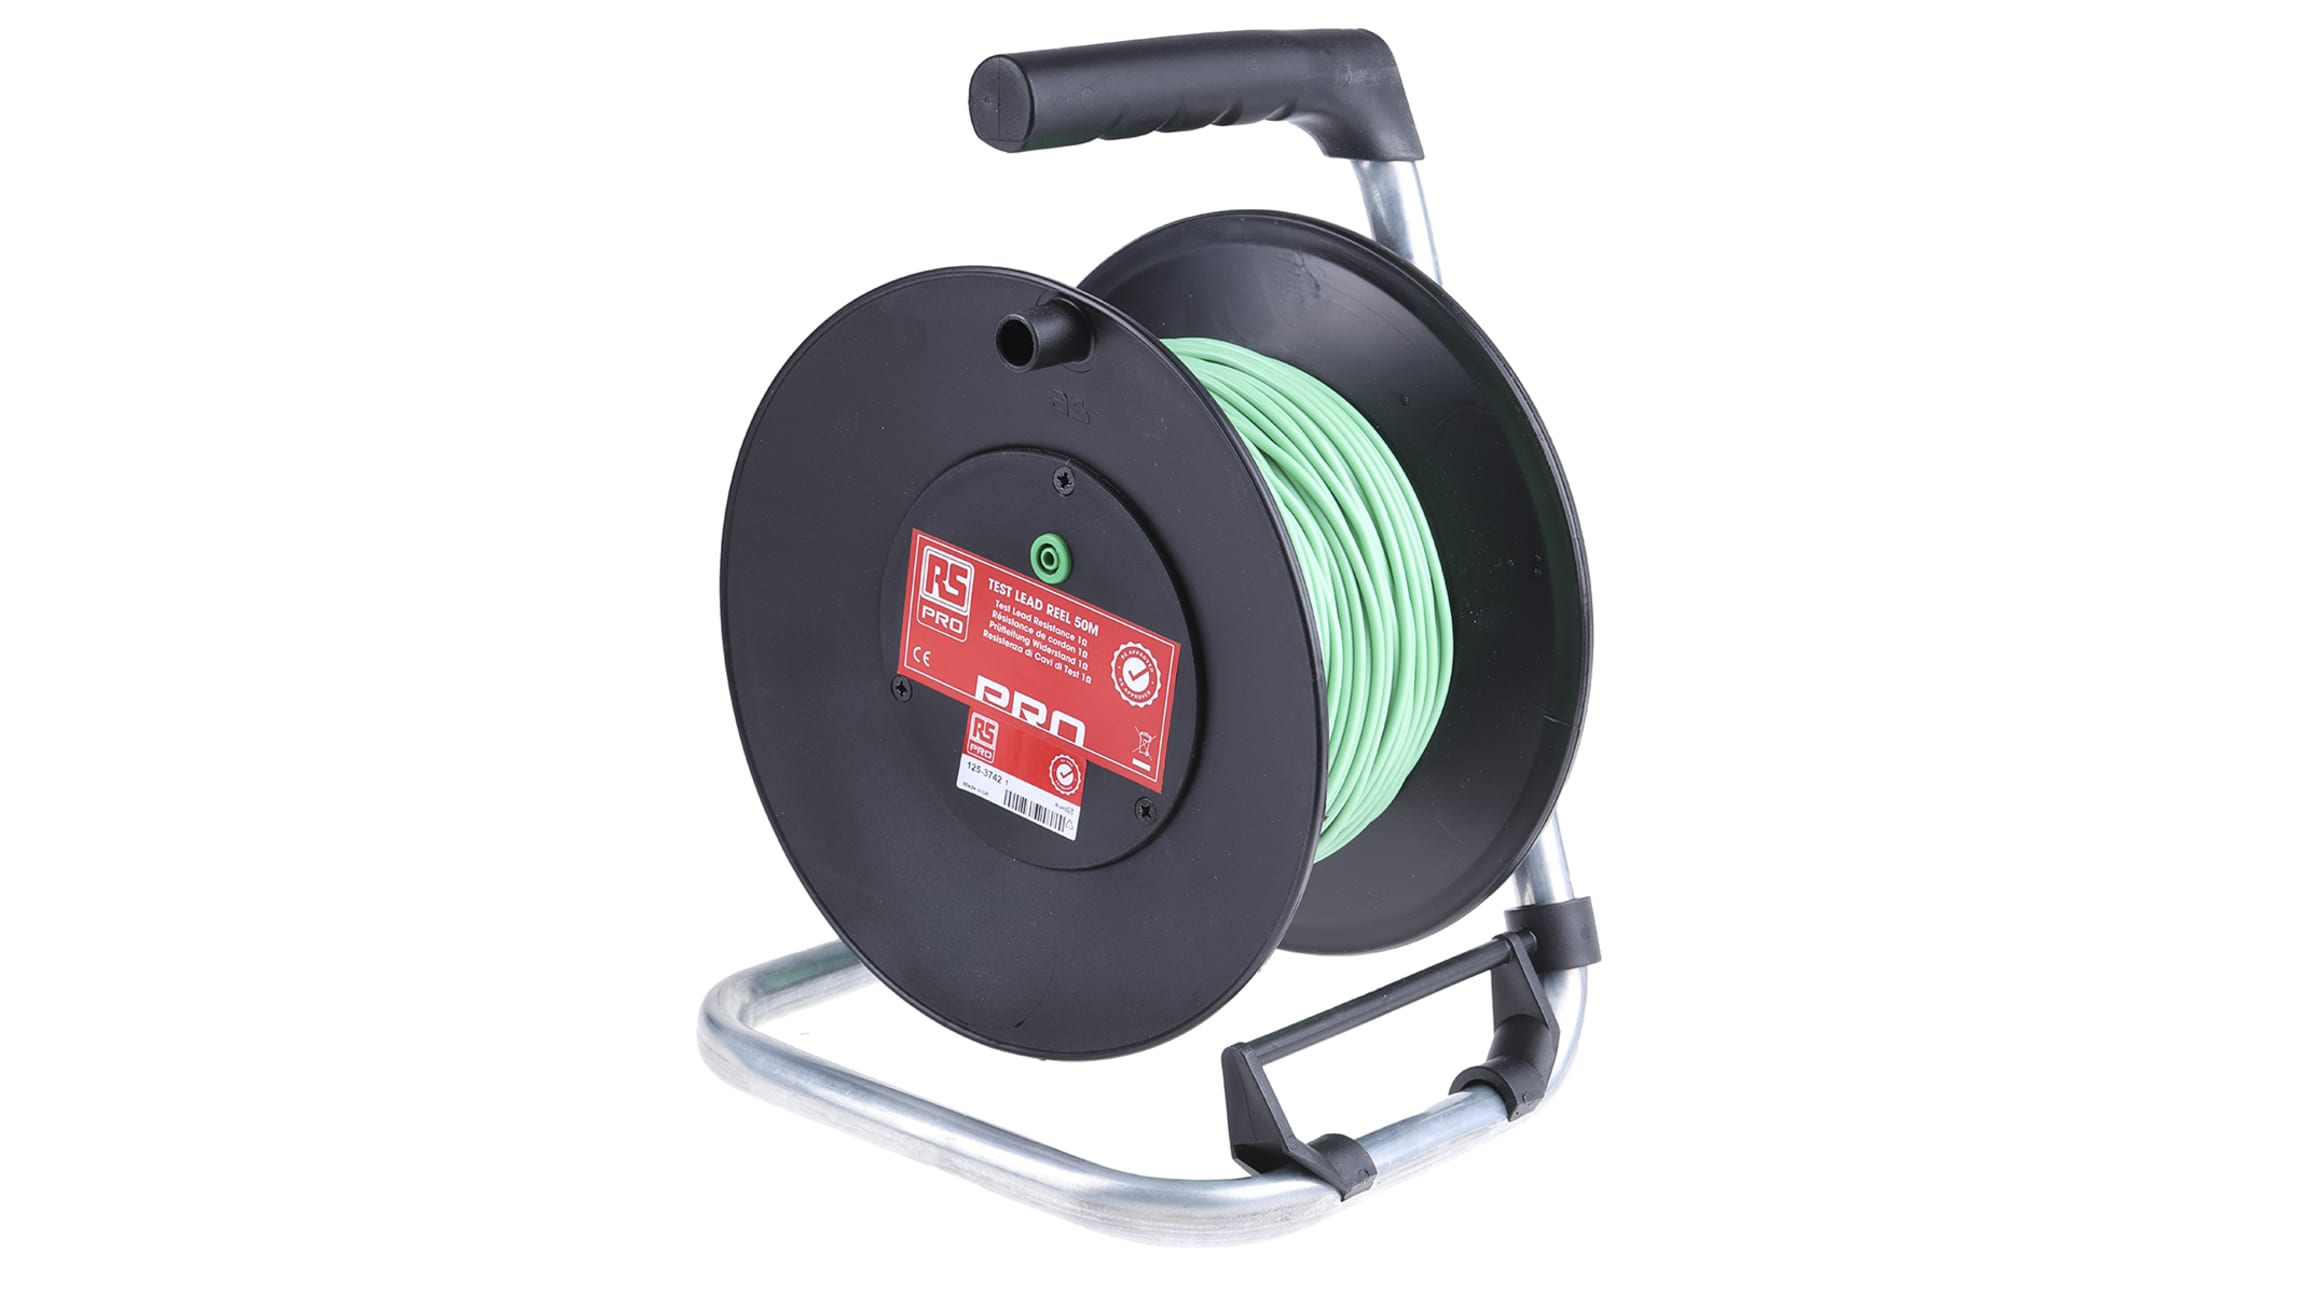 RS PRO Green Test Lead Extension Reel, 50m Cable Length, CAT II